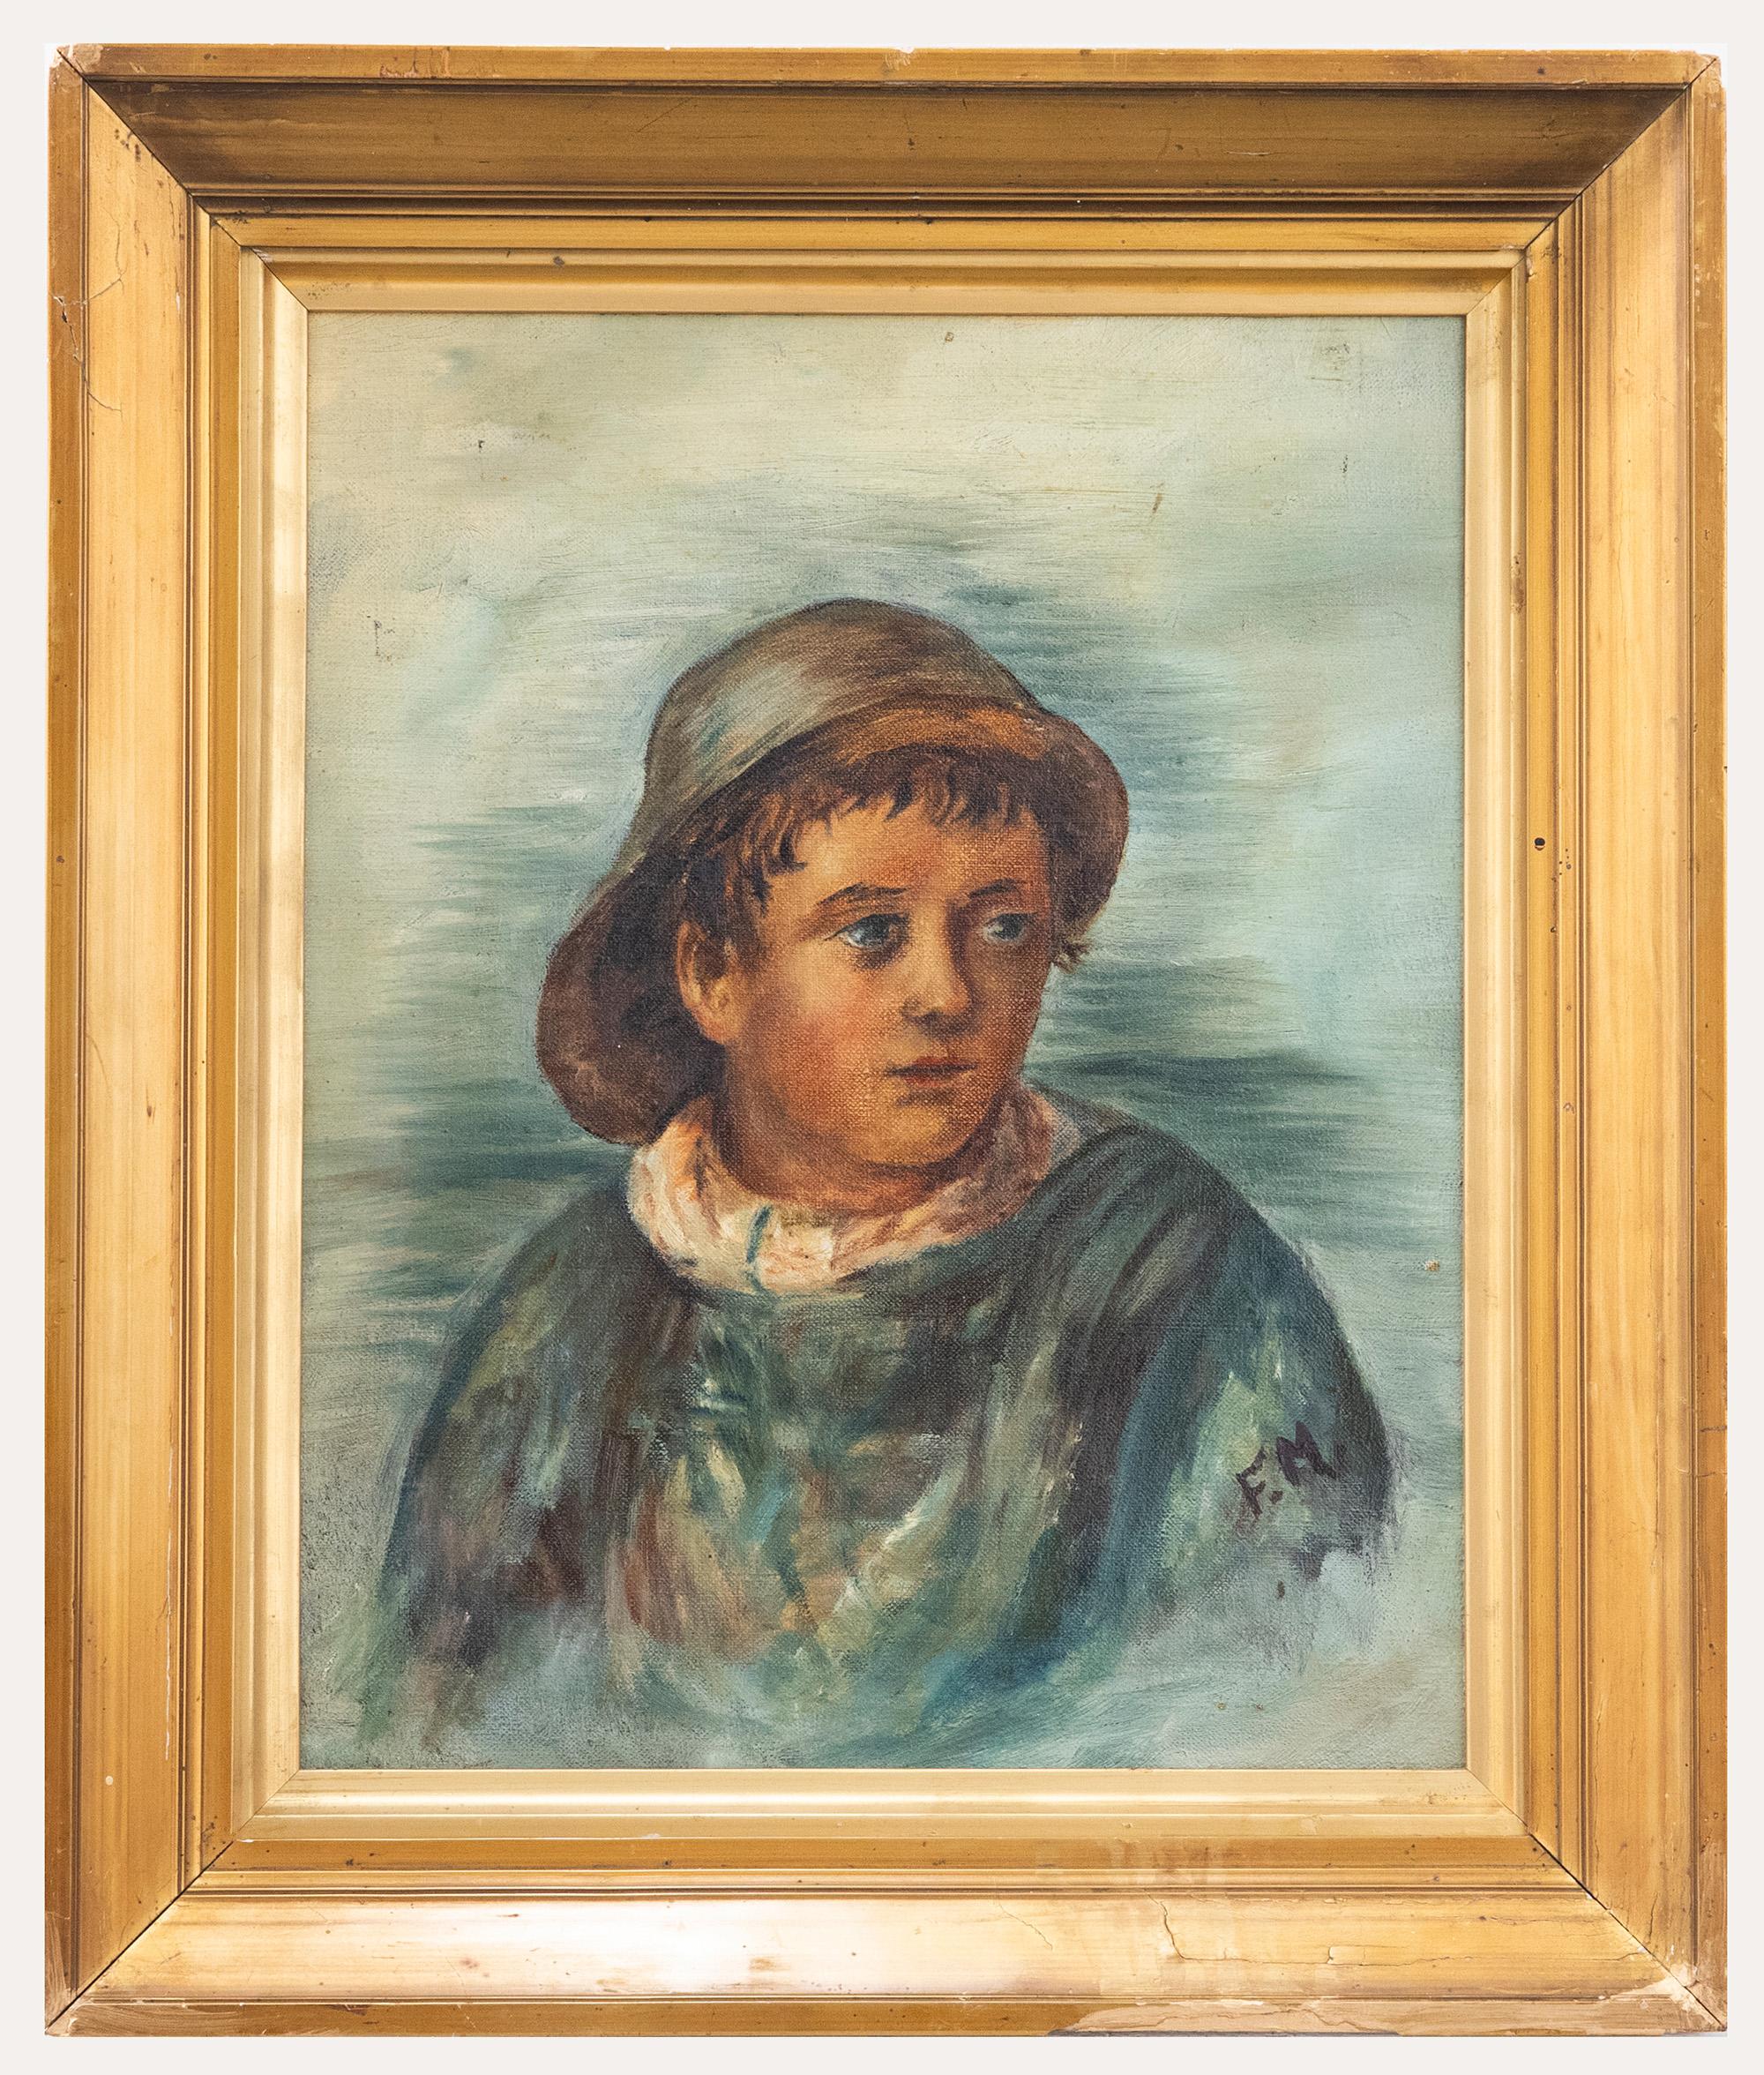 Unknown Portrait Painting - F. Morgan  - 1914 Oil, Fisher Boy